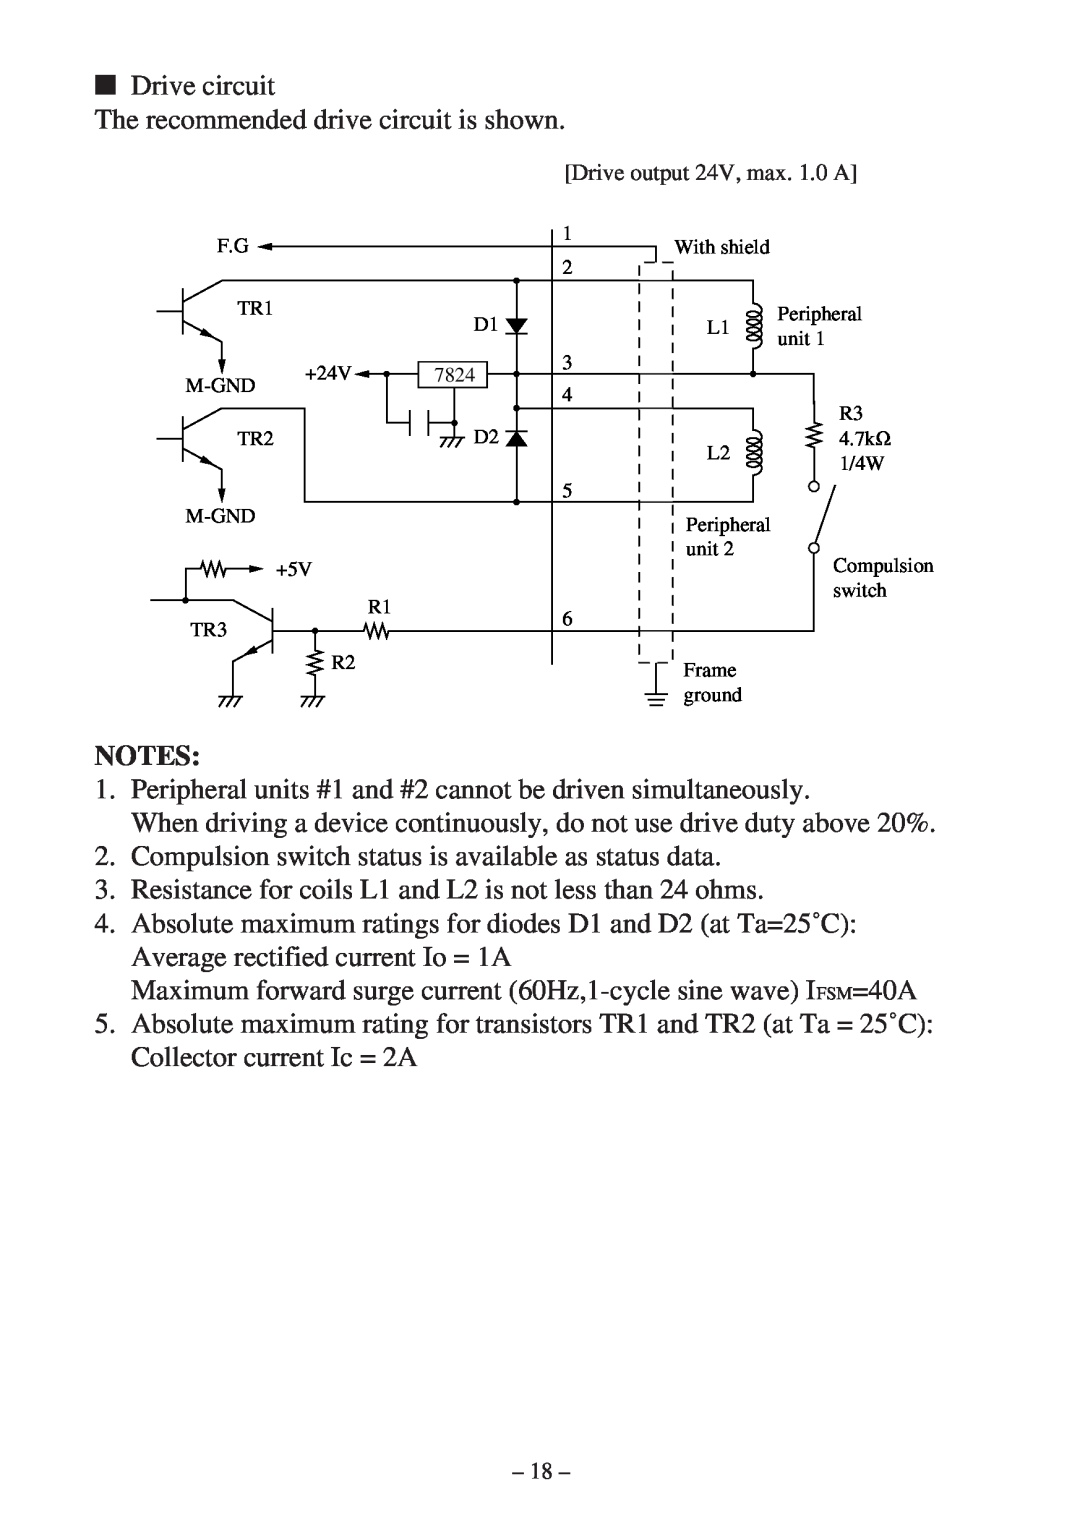 Star Micronics RS232 manual Drive circuit The recommended drive circuit is shown 